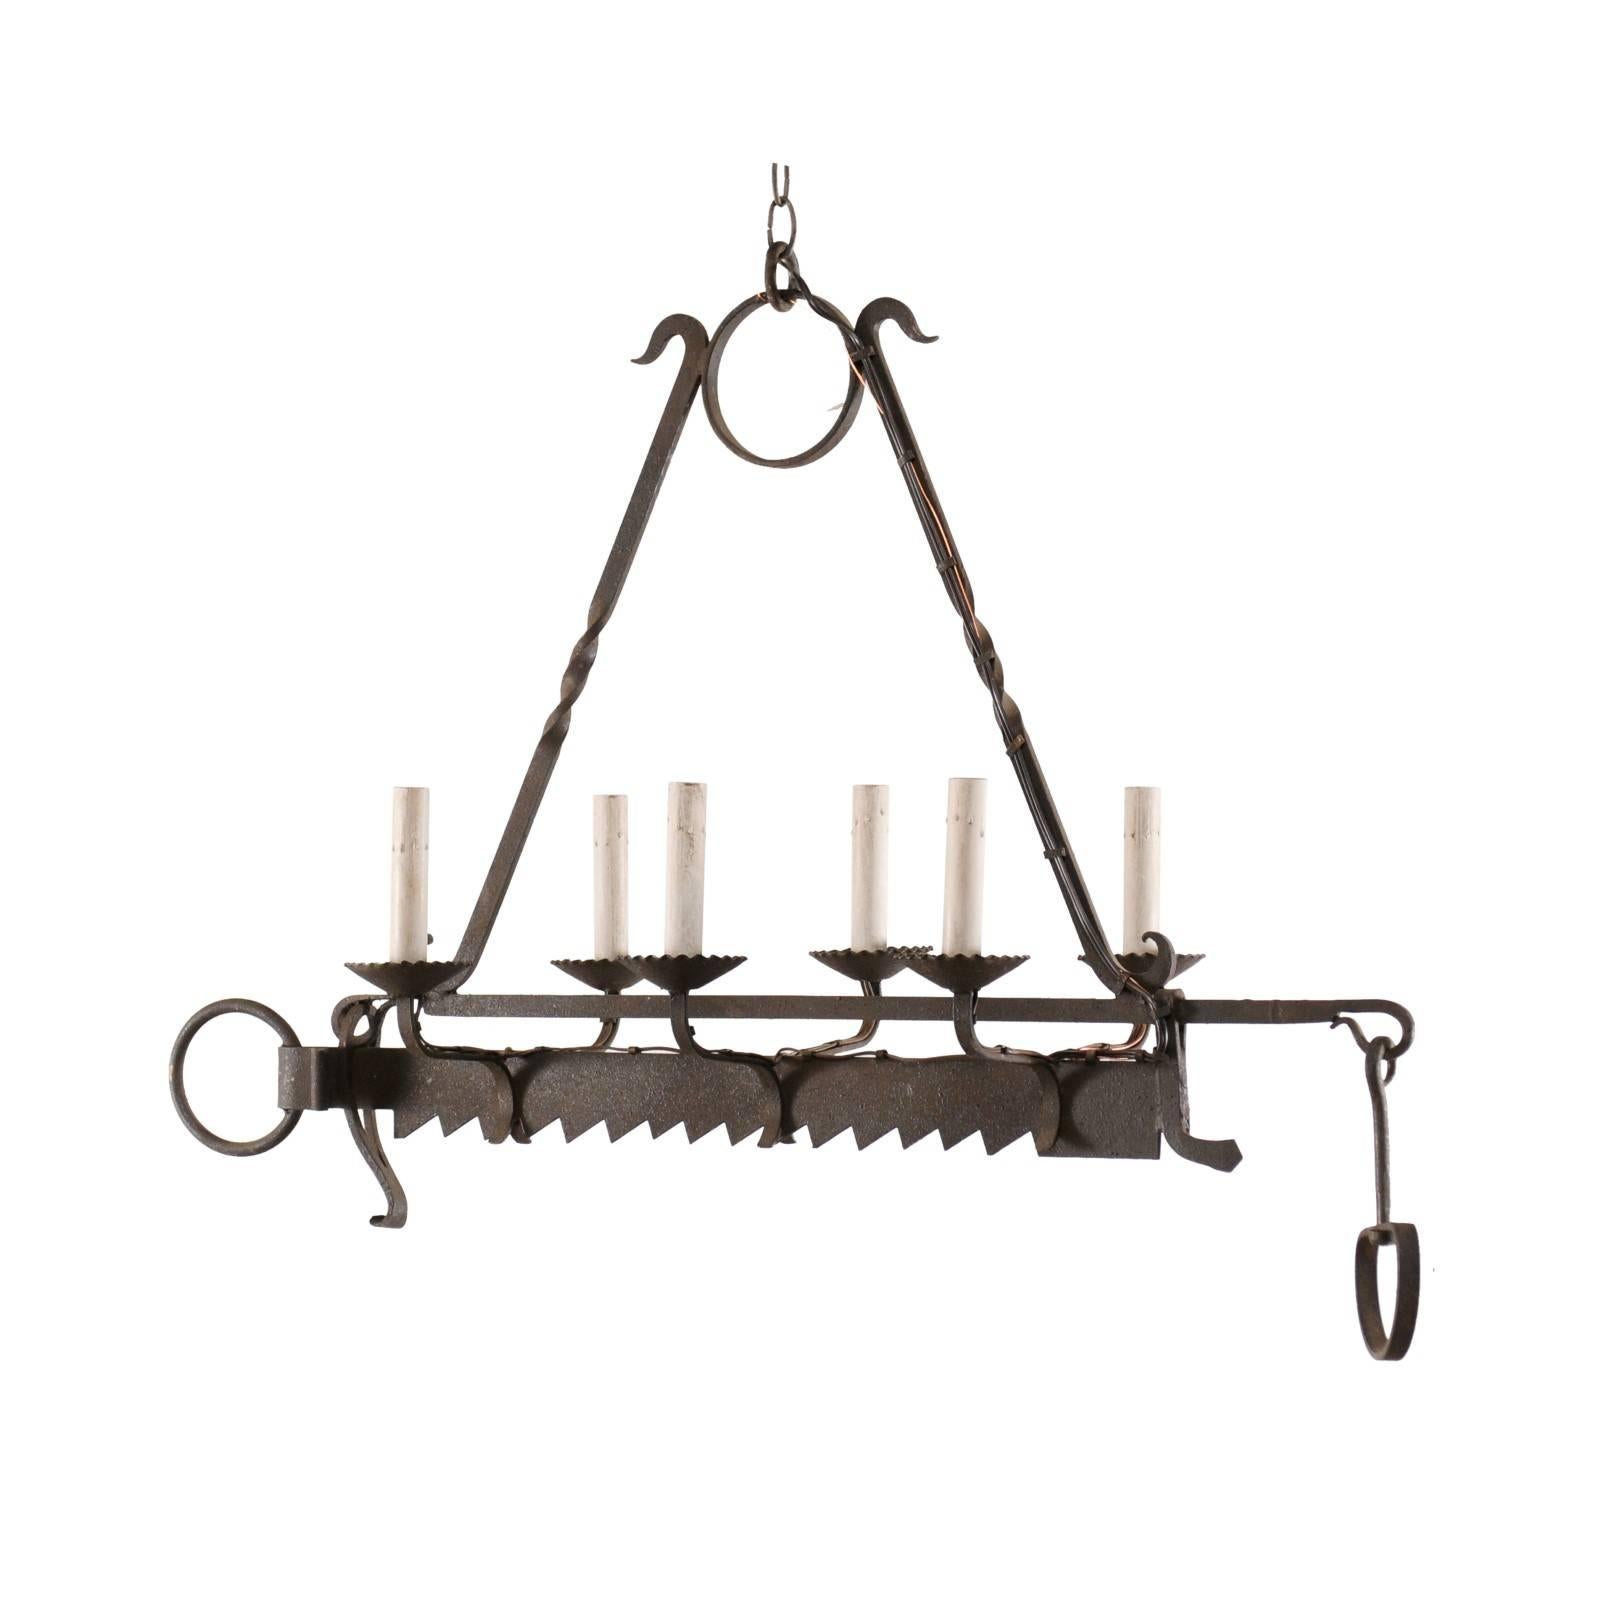 French Midcentury Six-Light Forged Iron Chandelier, 19th Century Spit Jack For Sale